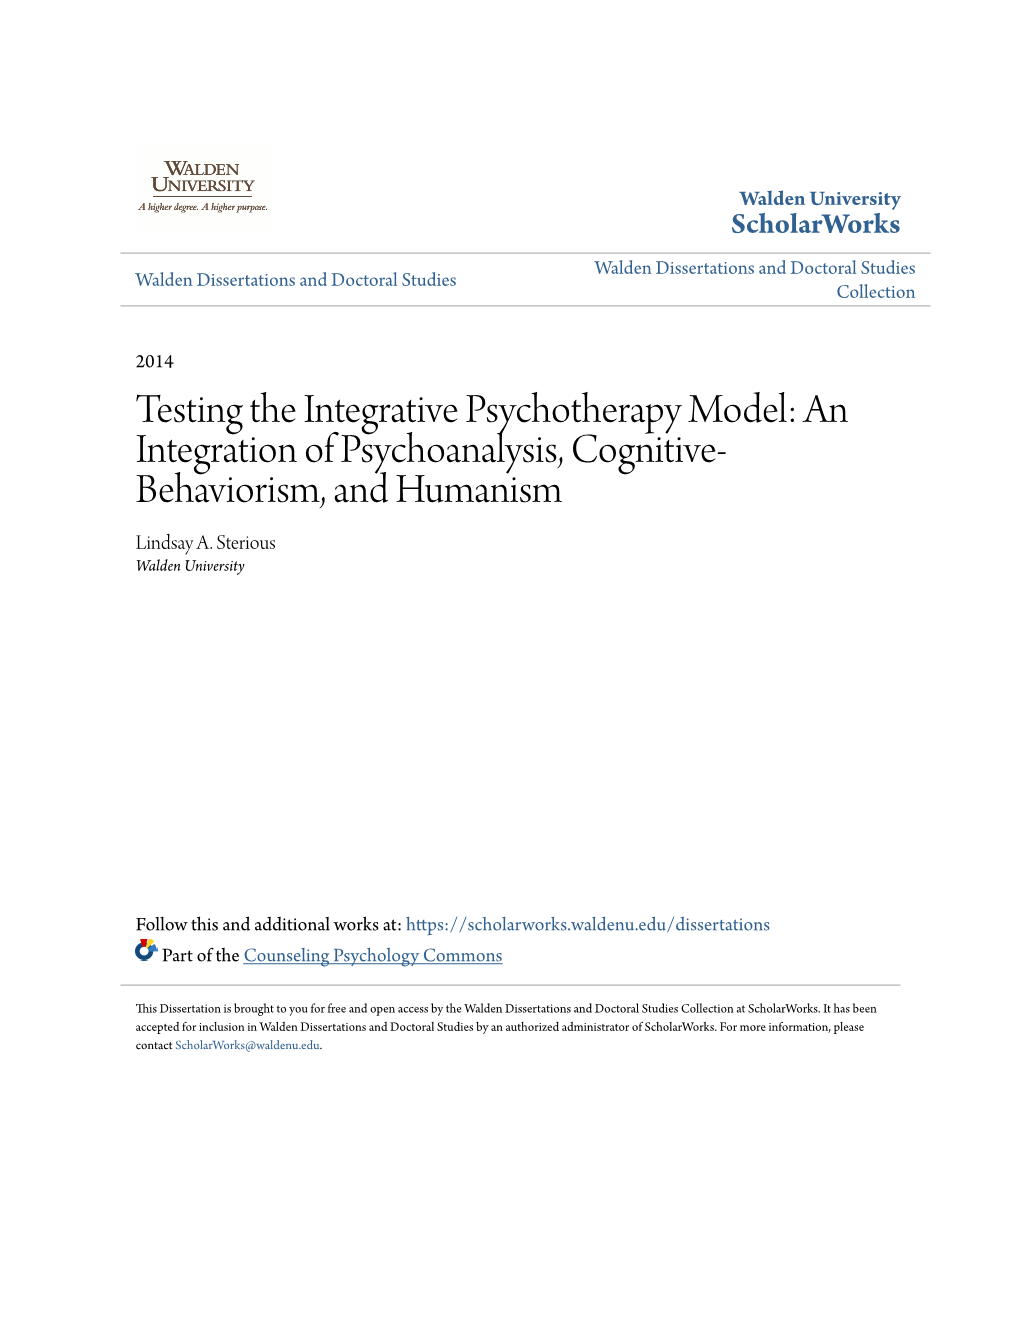 Testing the Integrative Psychotherapy Model: an Integration of Psychoanalysis, Cognitive- Behaviorism, and Humanism Lindsay A